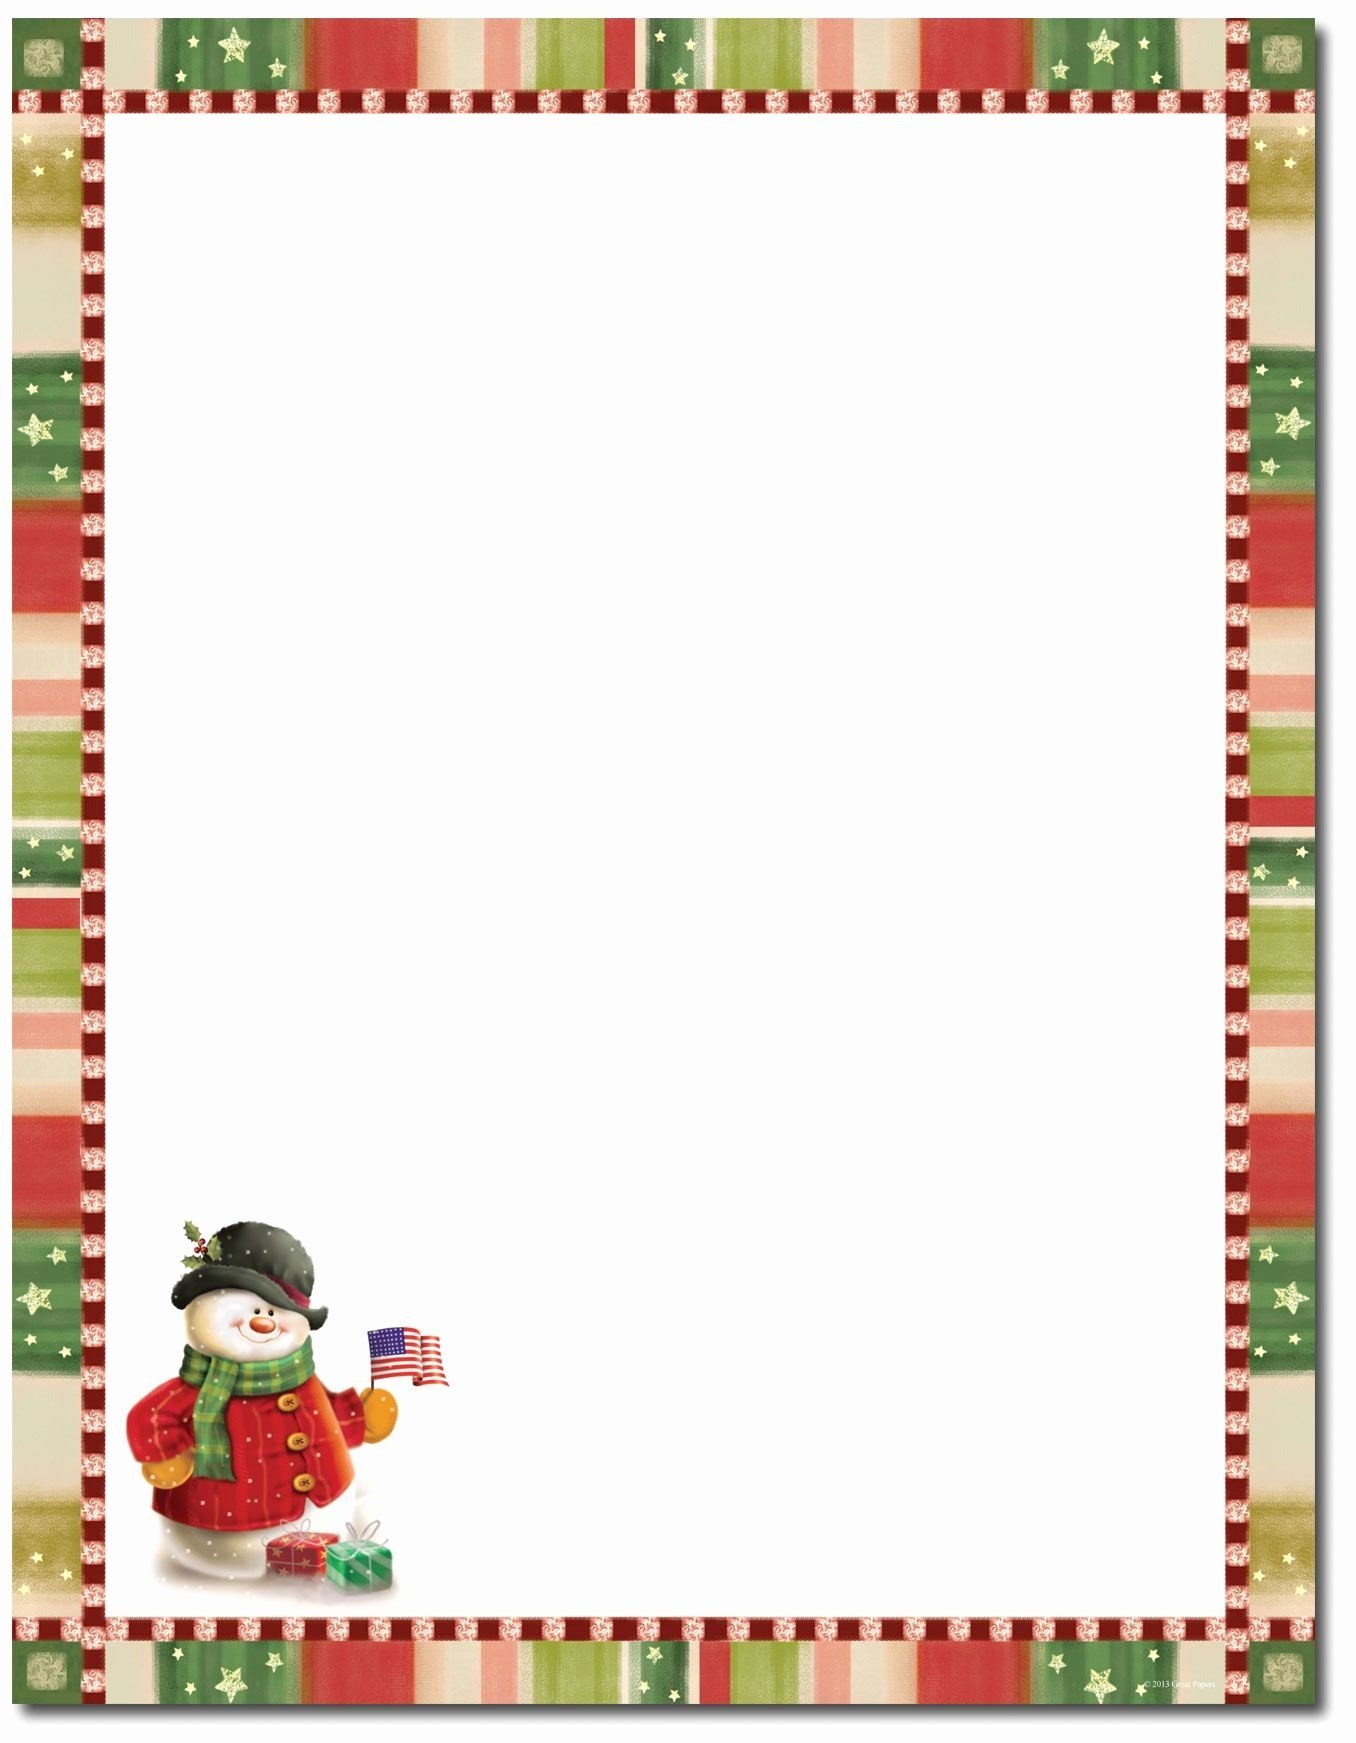 Free Christmas Stationery Templates Free Stationery Templates for Microsoft Word Pics – Floral